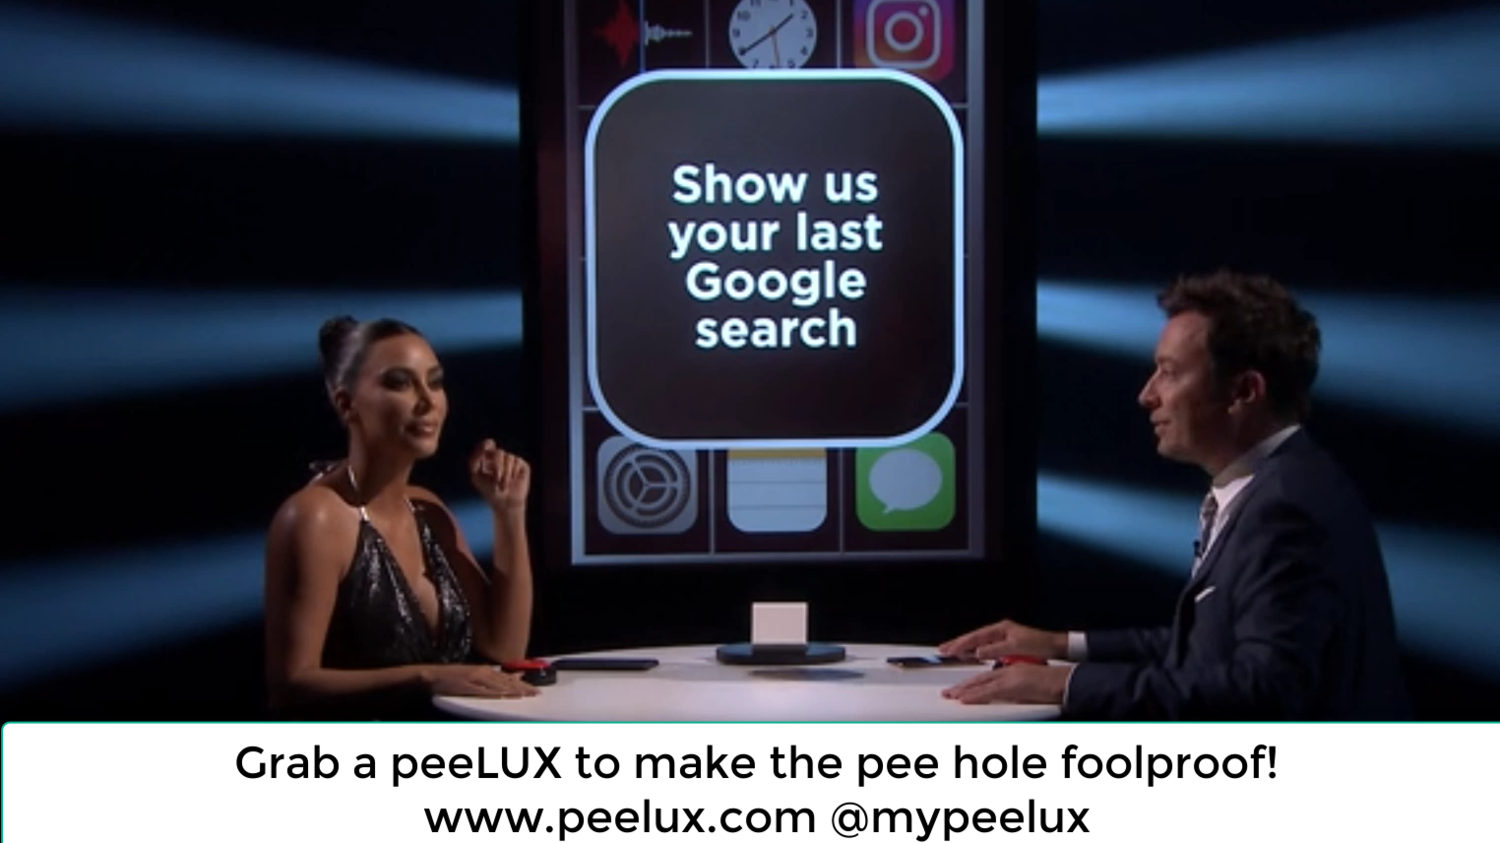 How to use the pee hole in shapewear — peeLUX - peeing in